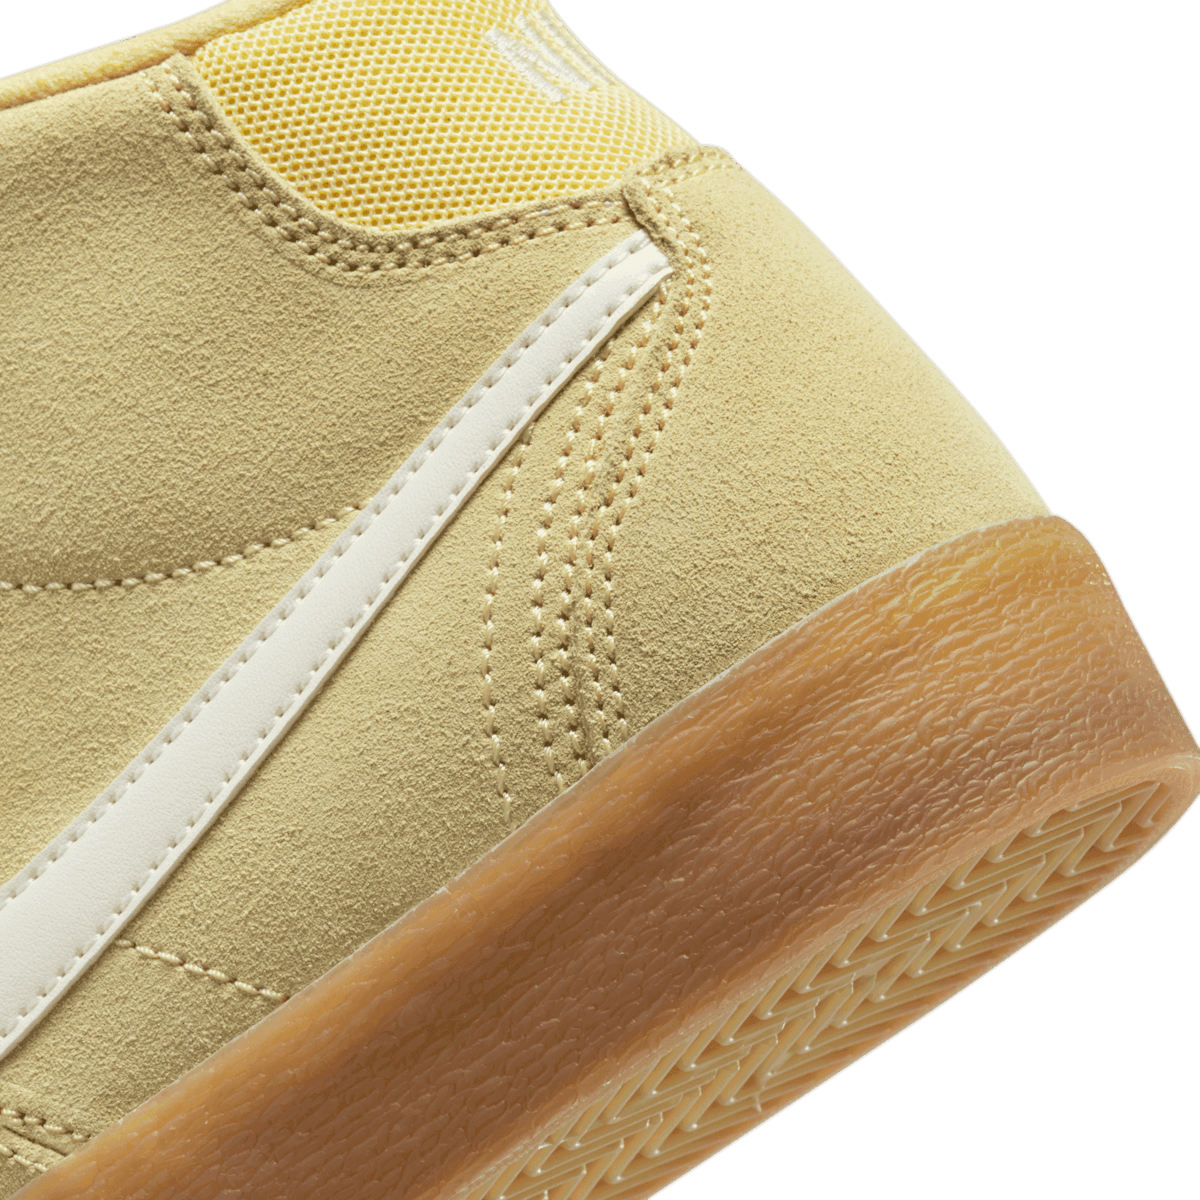 Nike SB Bruin High Skate Shoes in Yellow Angle 5